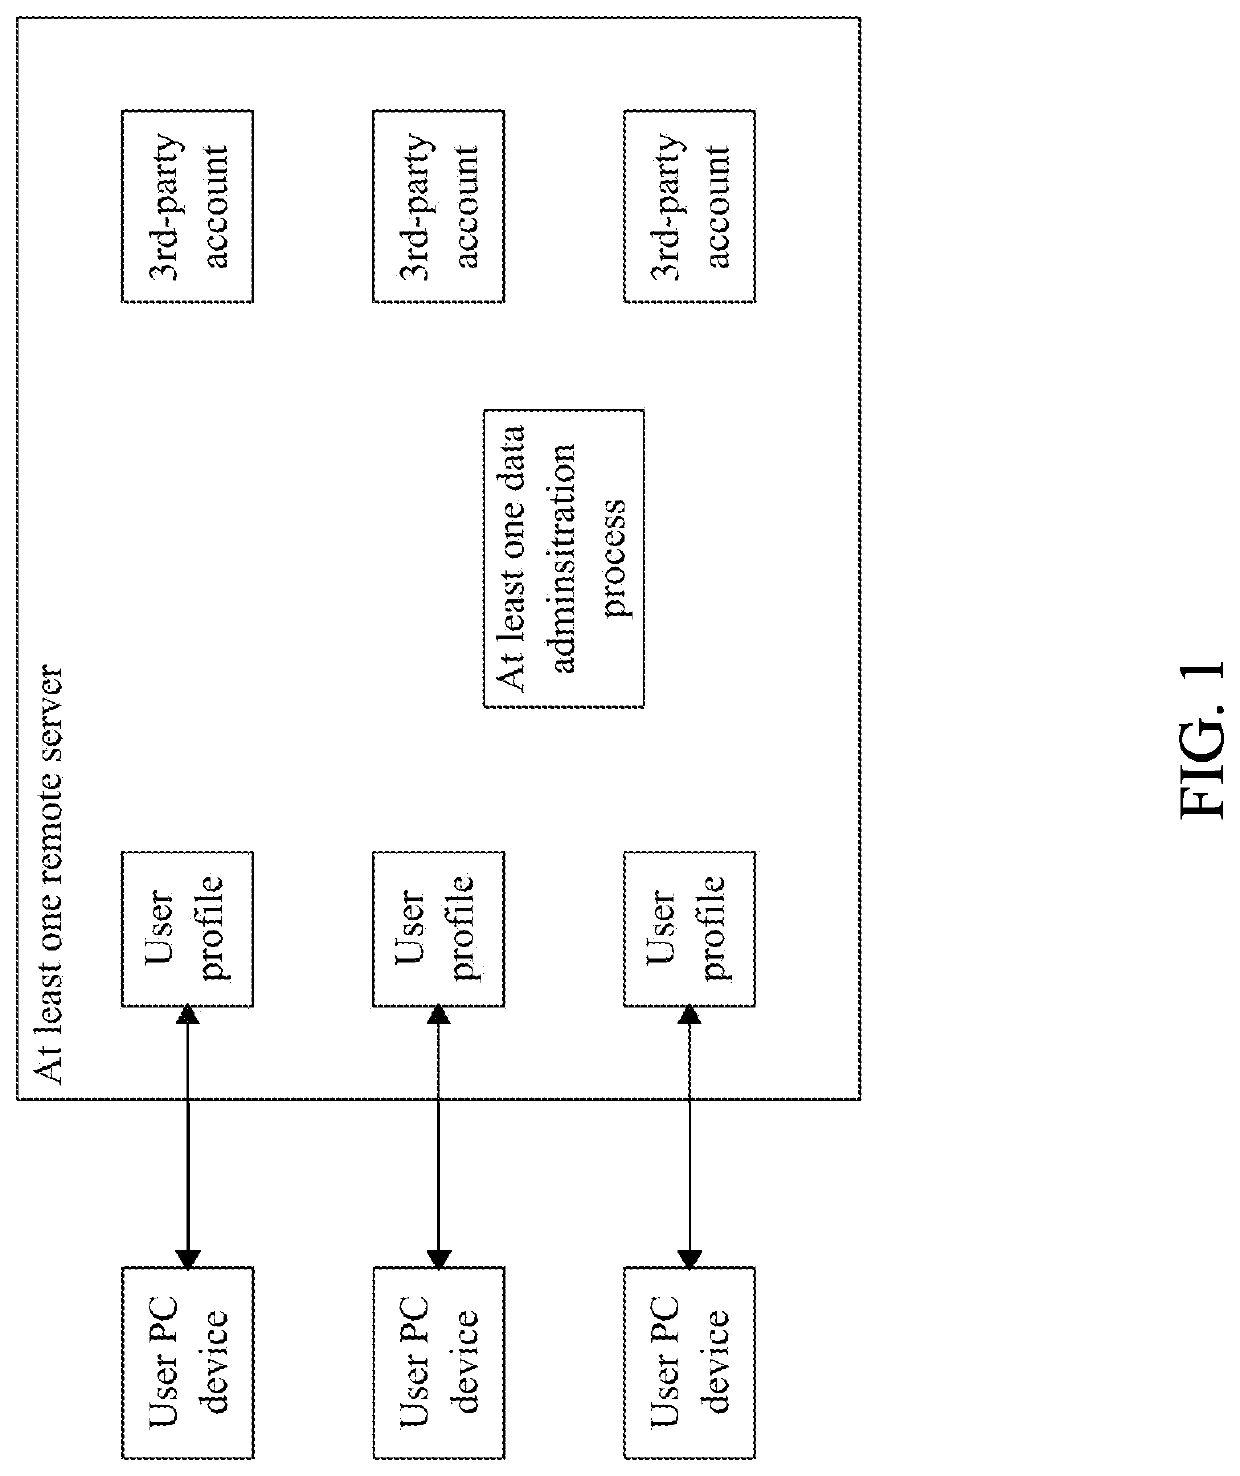 Method for Personal Data Administration in a Multi-Actor Environment